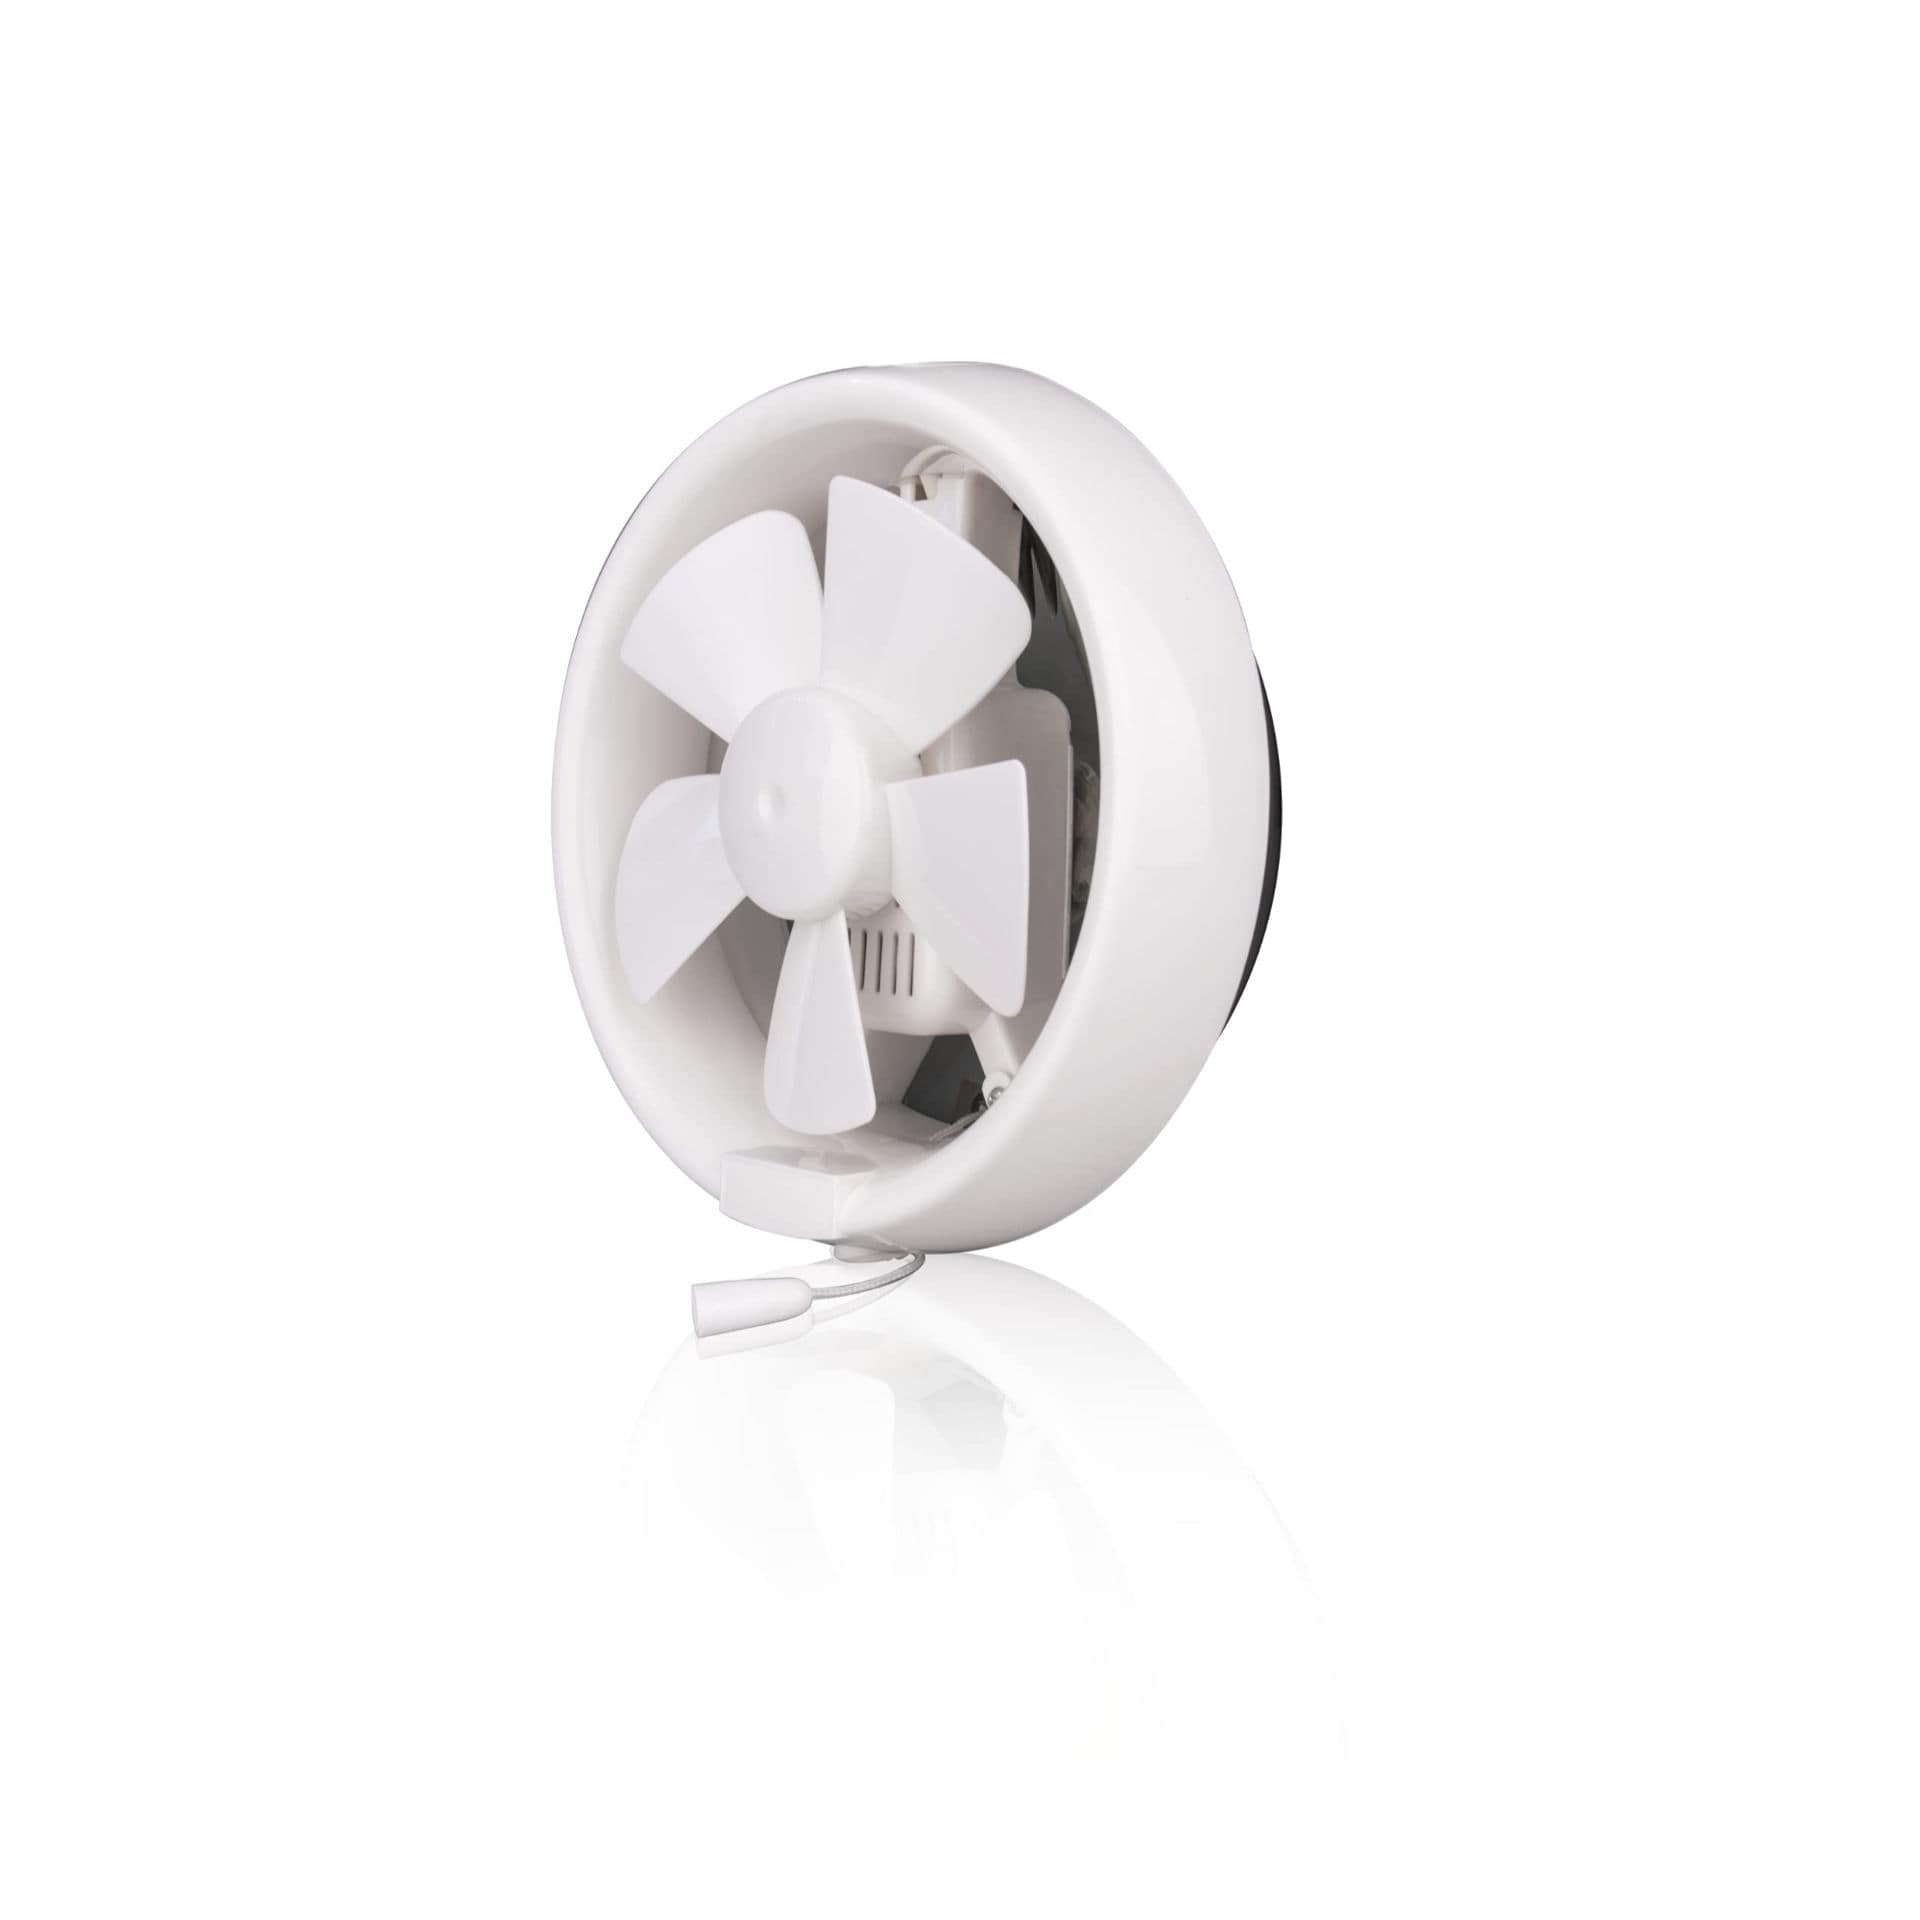 Ingco 6" Exhaust Fan 15W - EF1561 | Supply Master Accra, Ghana Fan & Cooler Buy Tools hardware Building materials